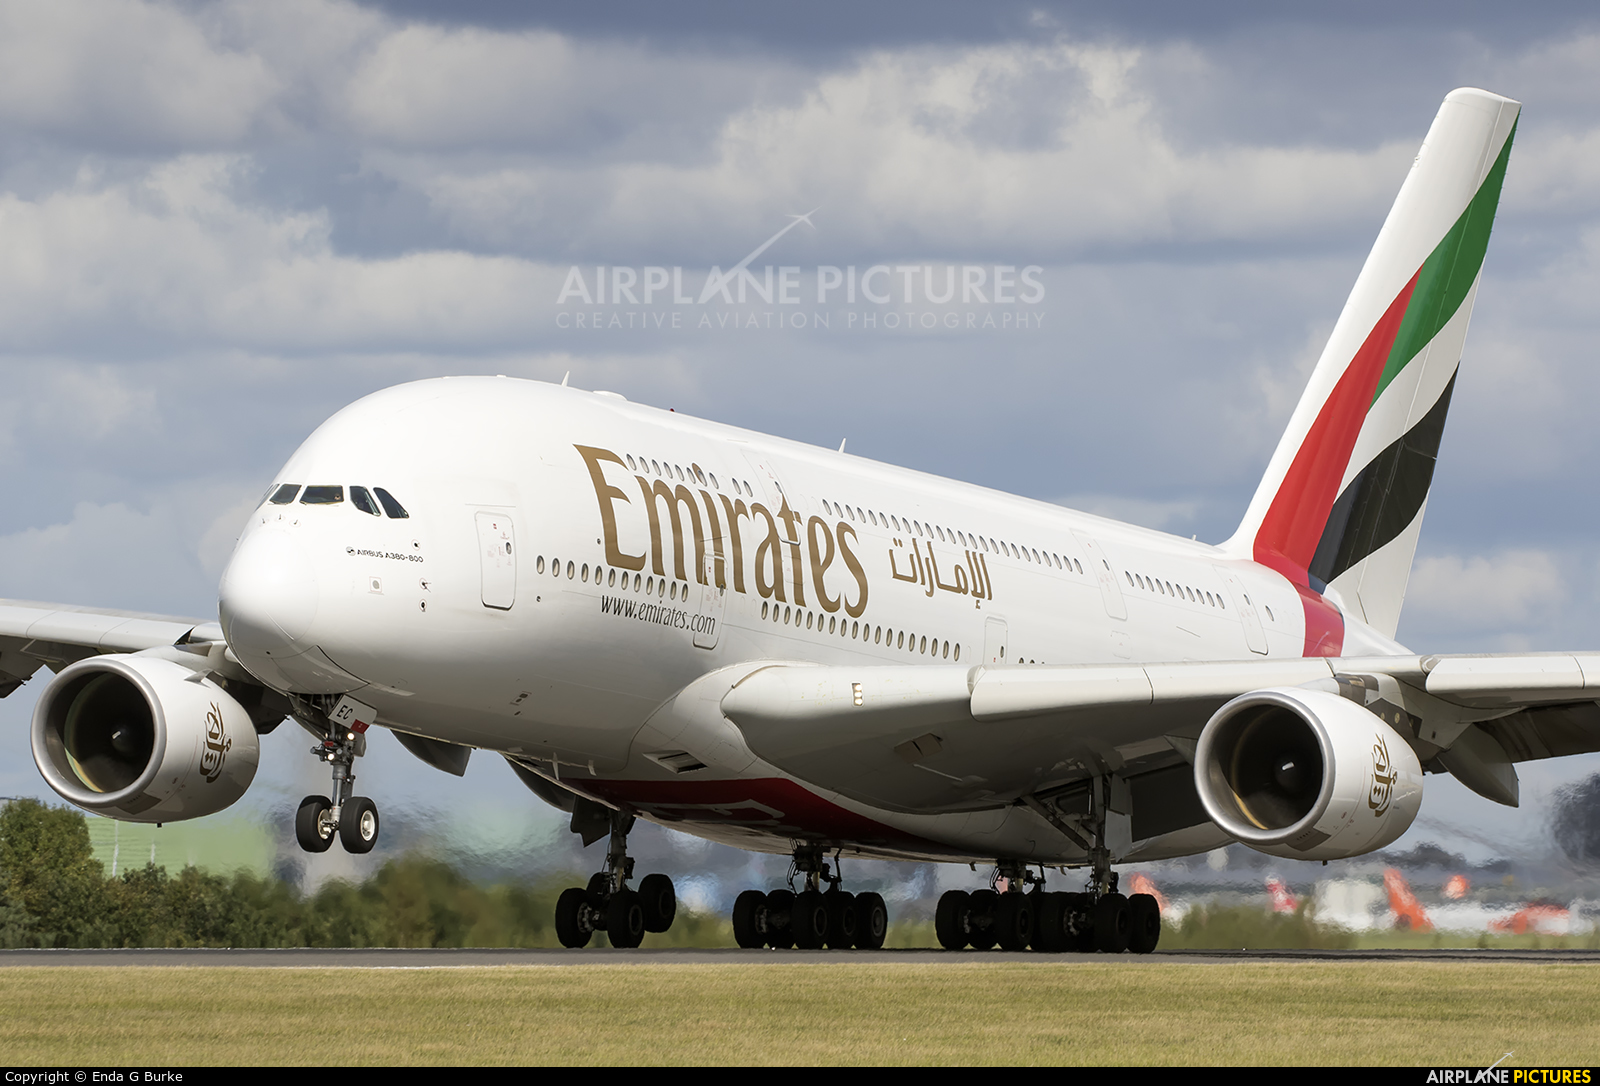 Emirates Airlines A6-EEC aircraft at Manchester